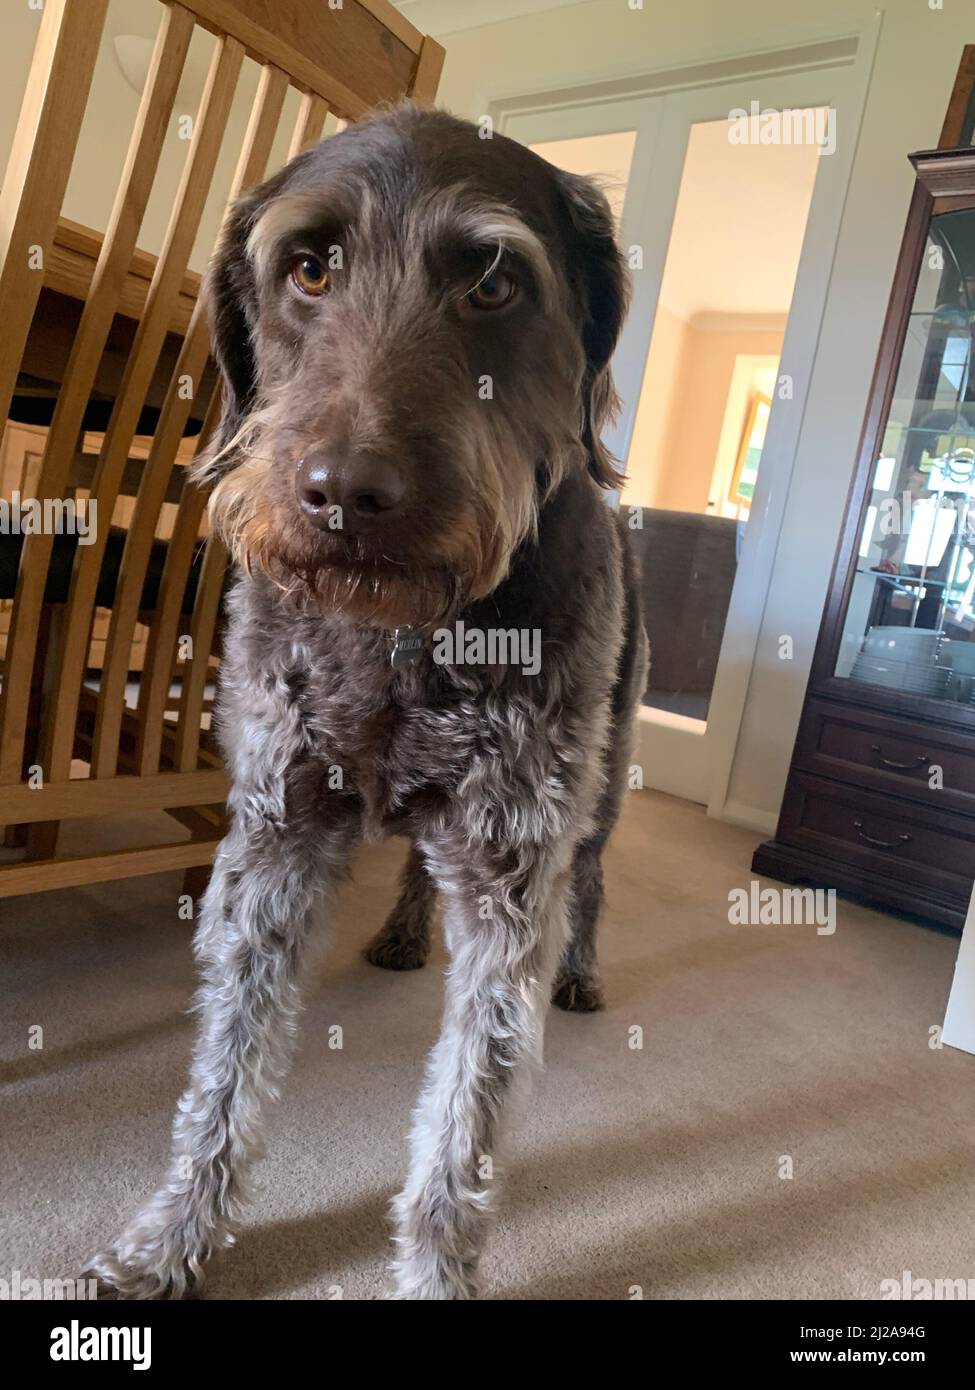 brown Labradoodle dog standing wanting to go for a walk dog standing facing brown happy beard doodle dogs inside friendly grey smart looking doggy Stock Photo